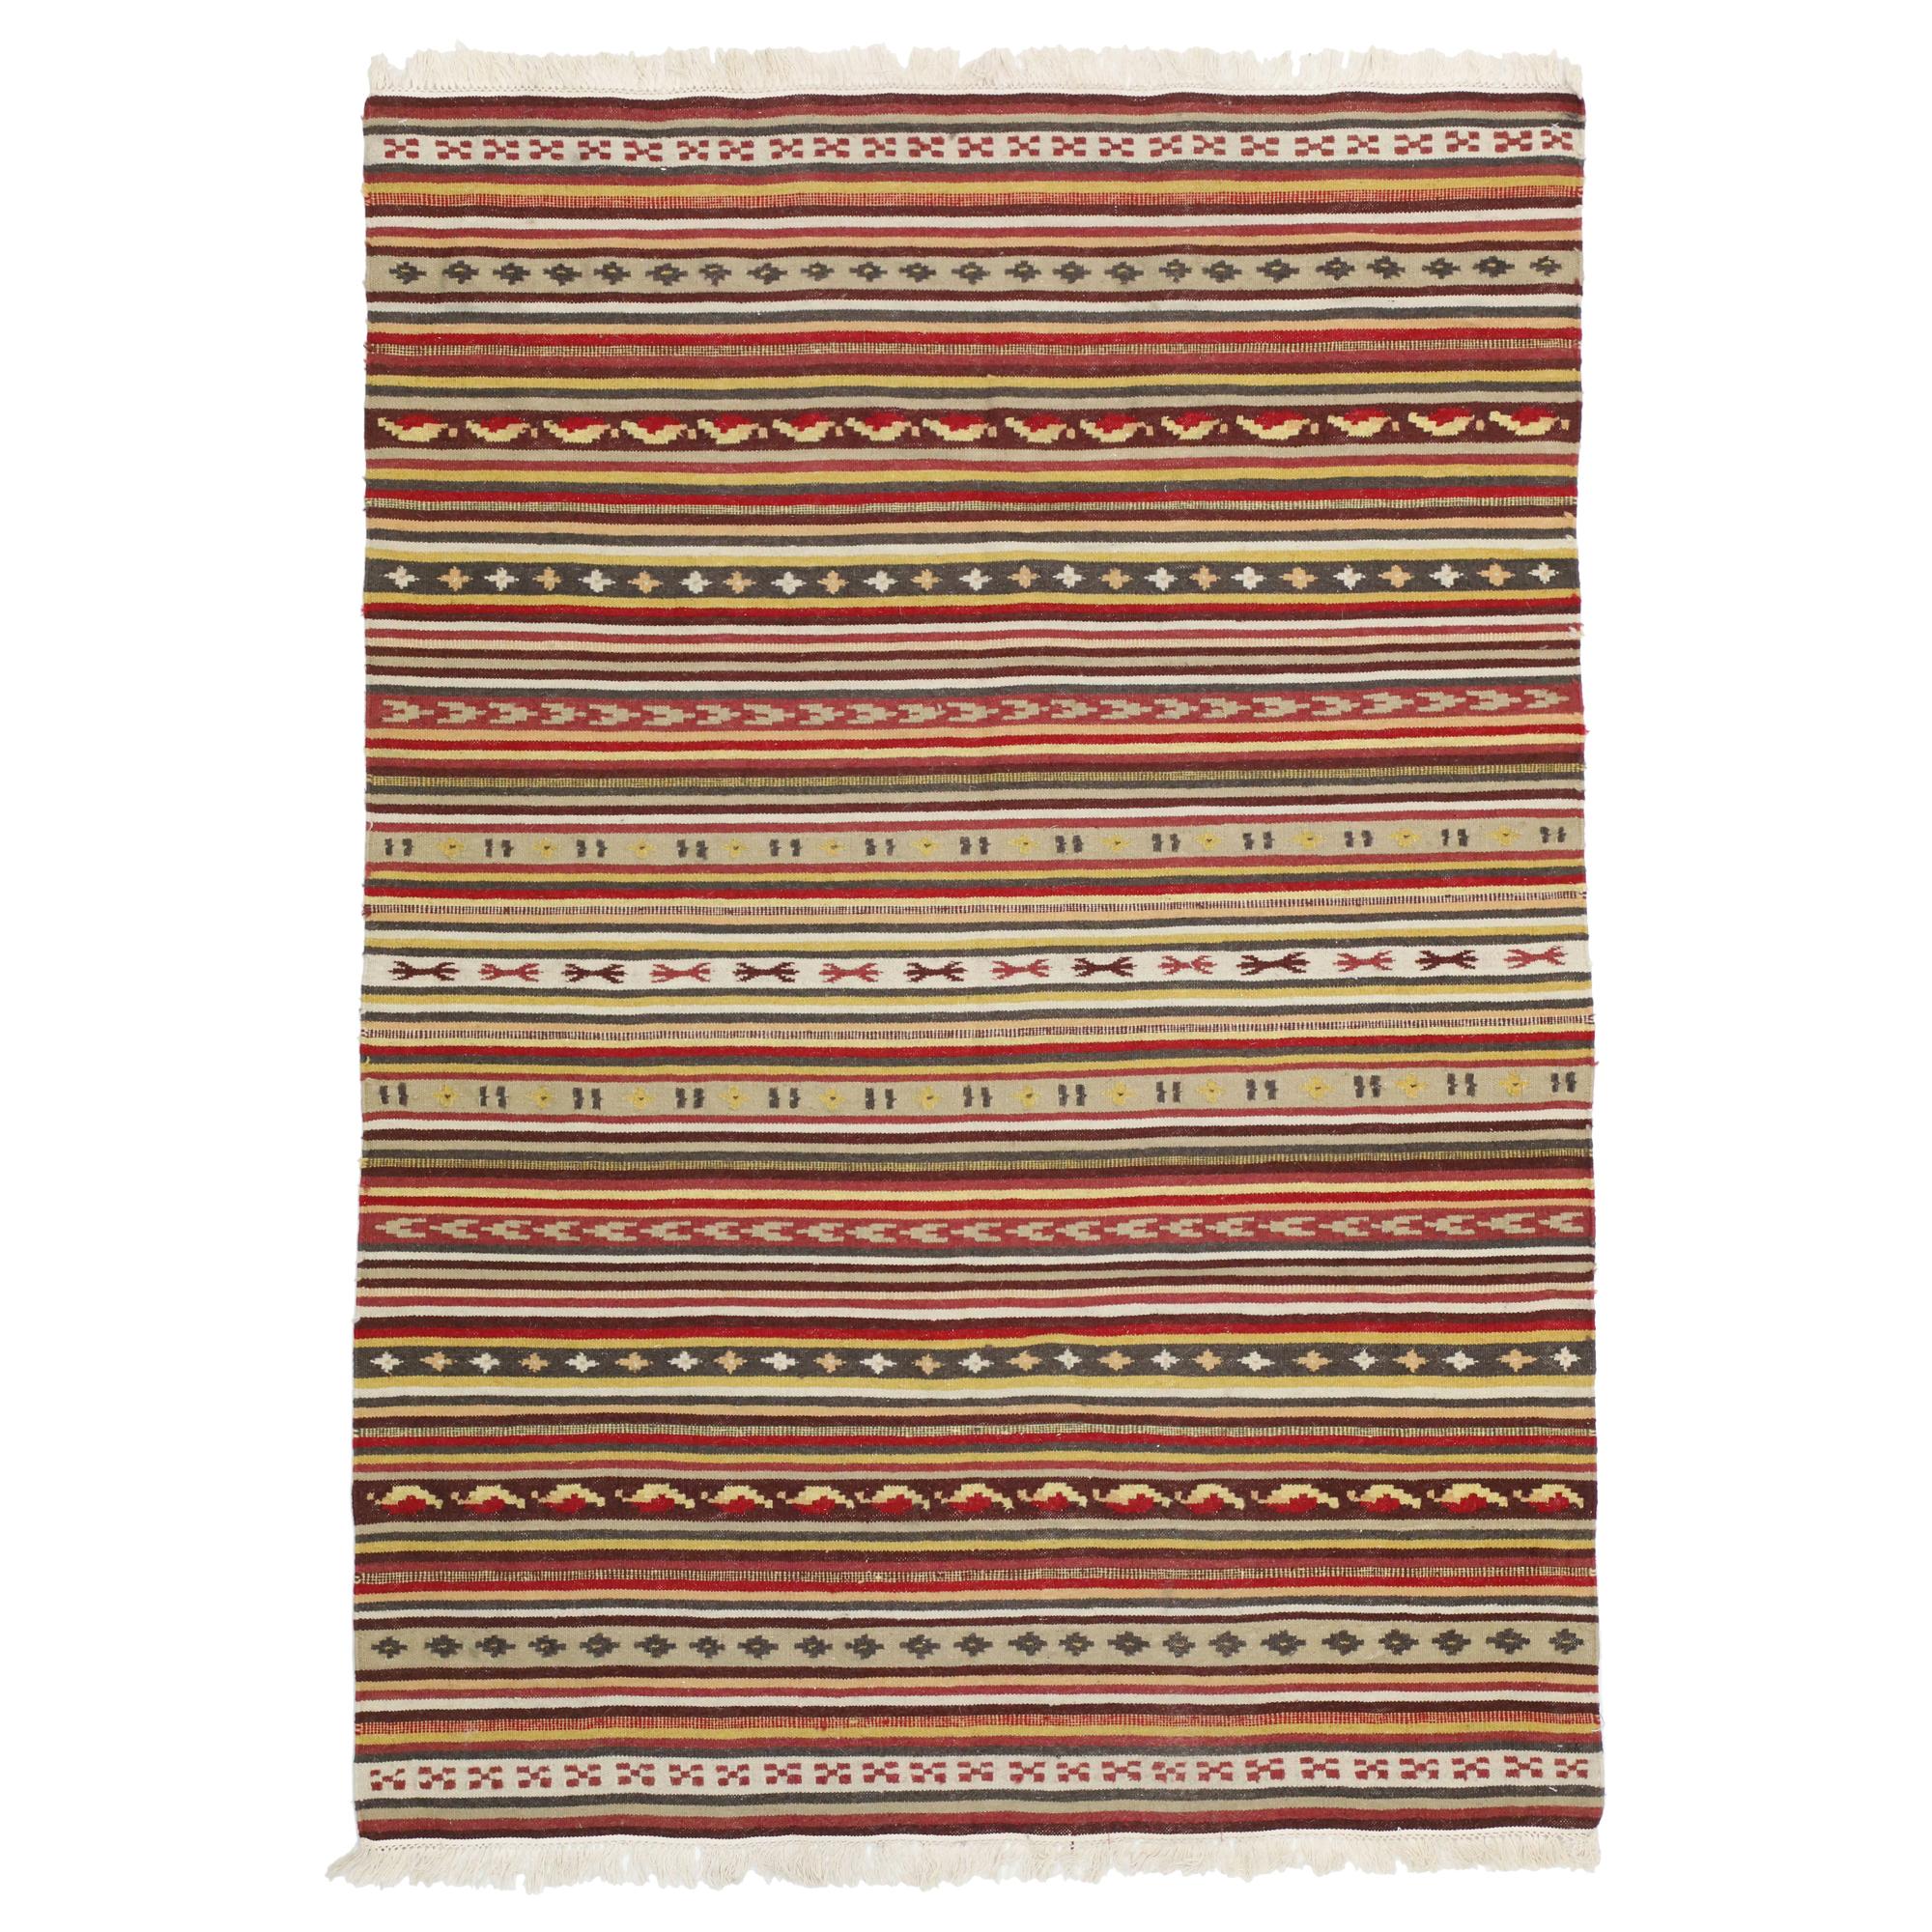 Vintage Turkish Striped Kilim Rug with Tribal Style, Flat-Weave Rug with Stripes